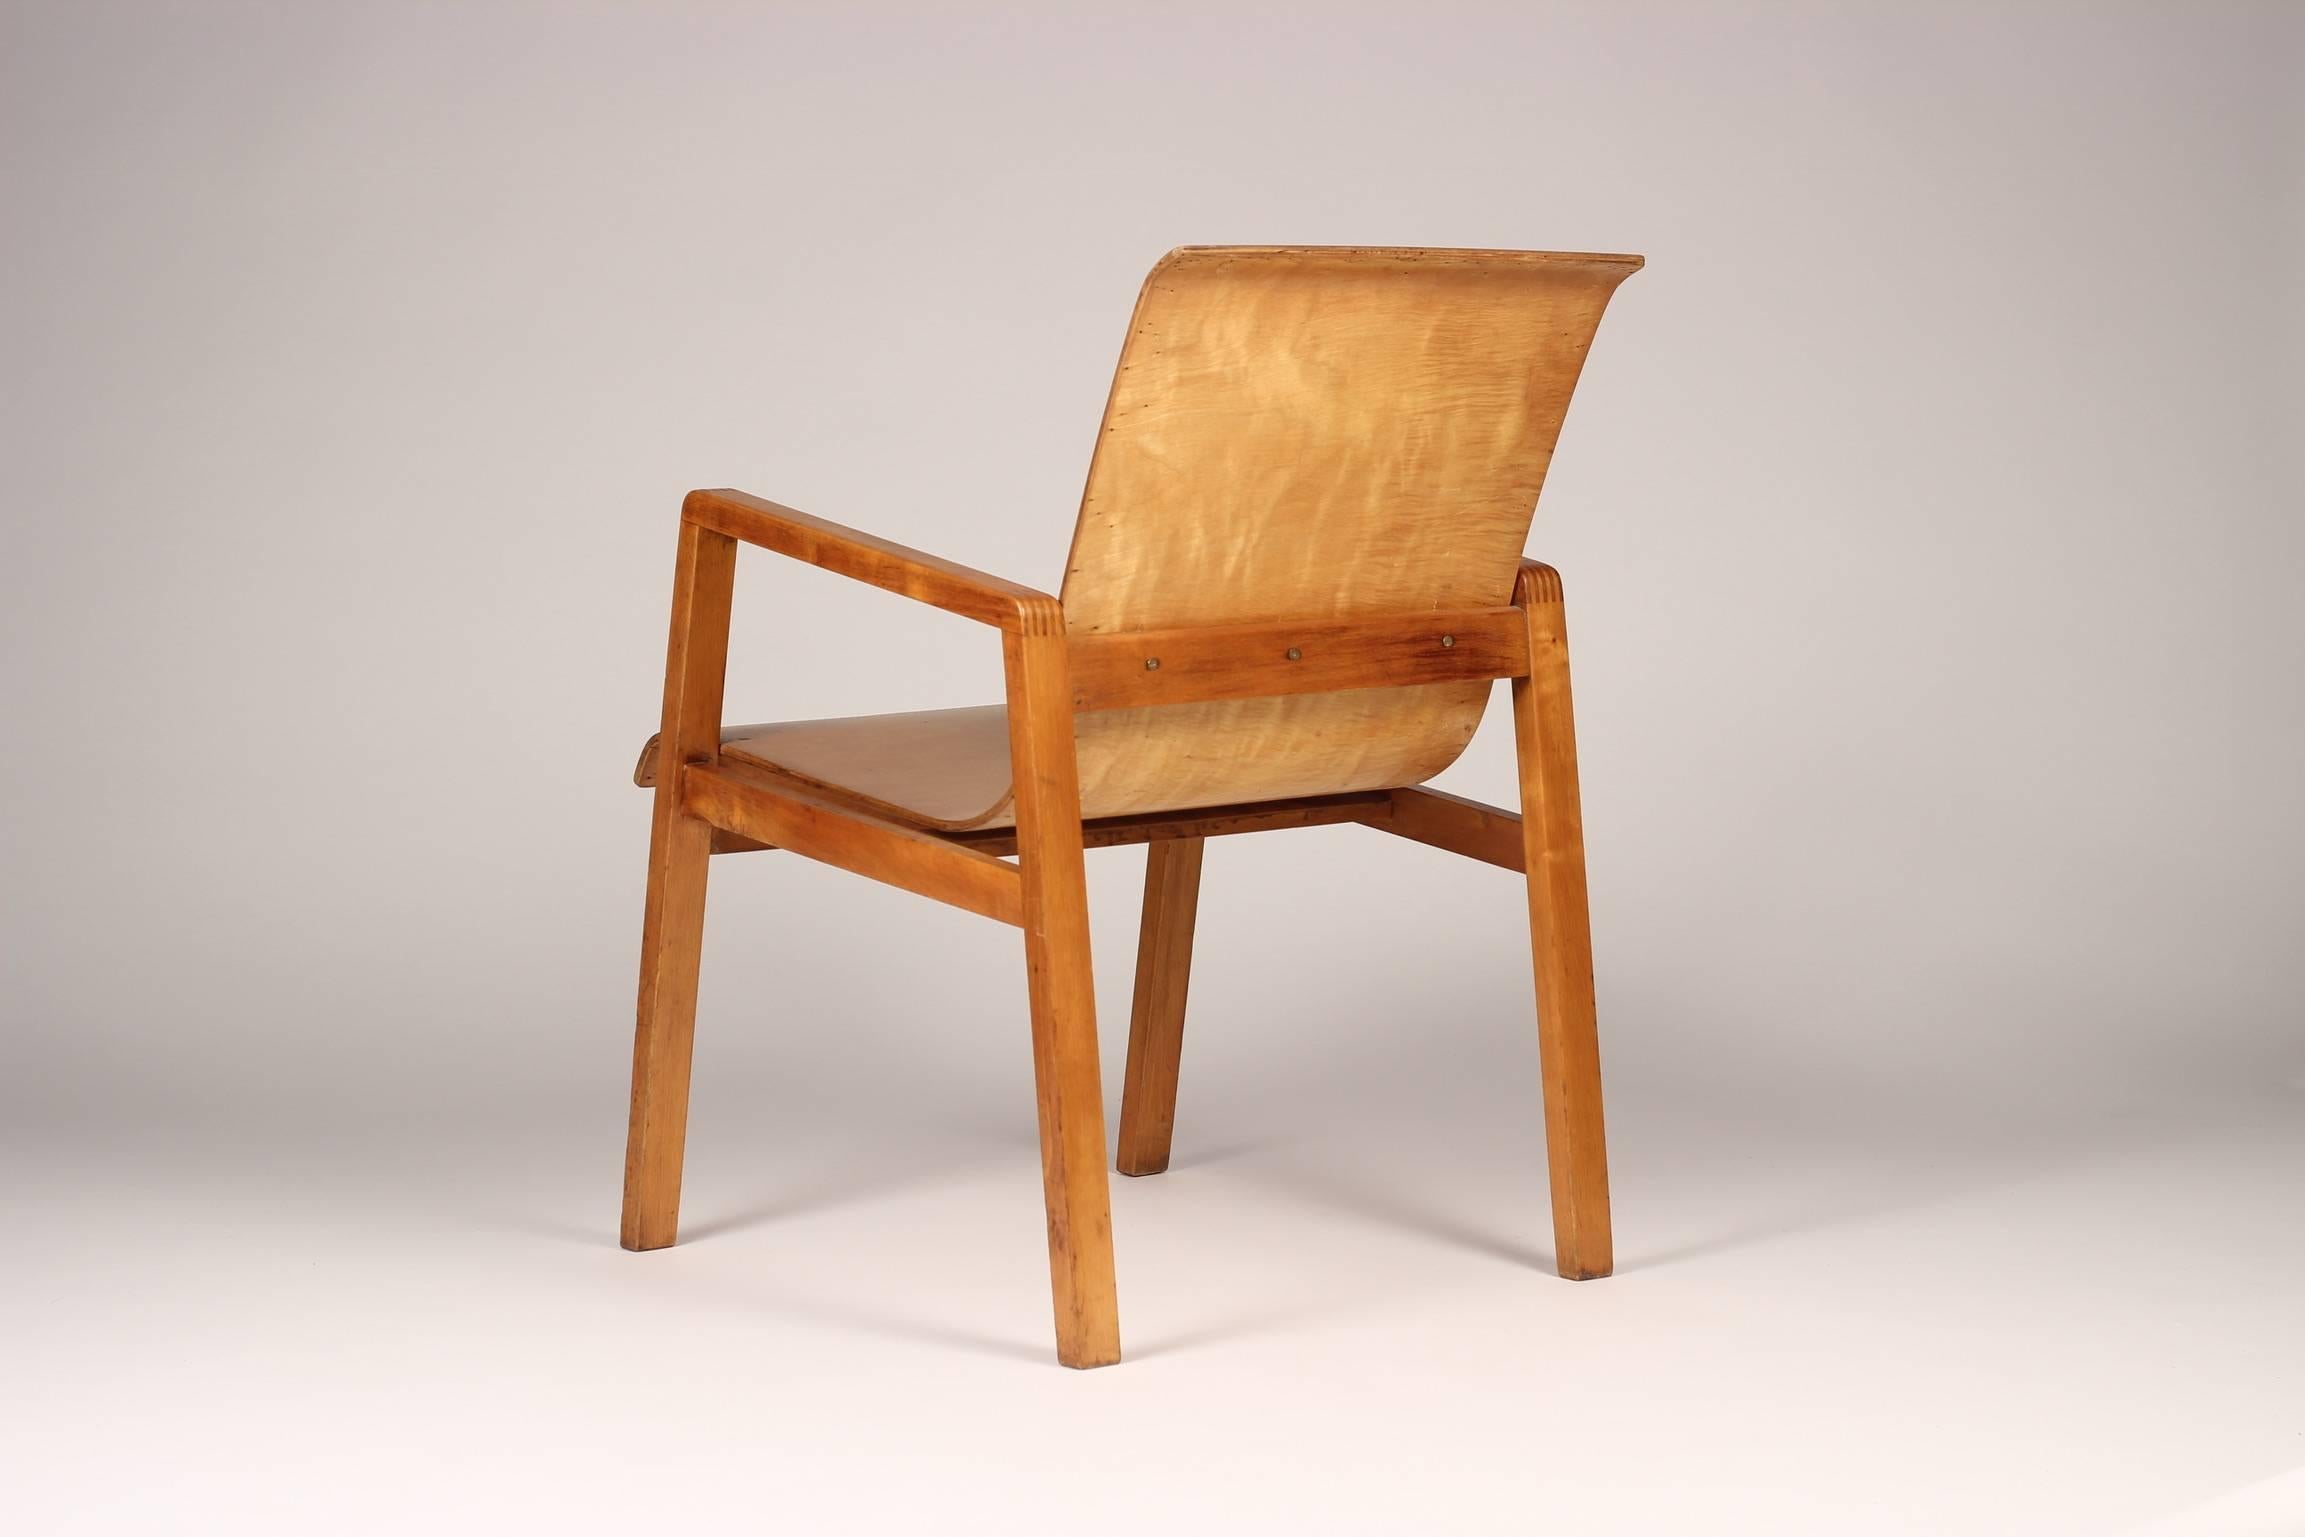 An early and exceptionally rare Alvar Aalto Hallway chair, which was originally designed for the Paimio Sanitorium. The chair bears to the verso an original Finmar label.